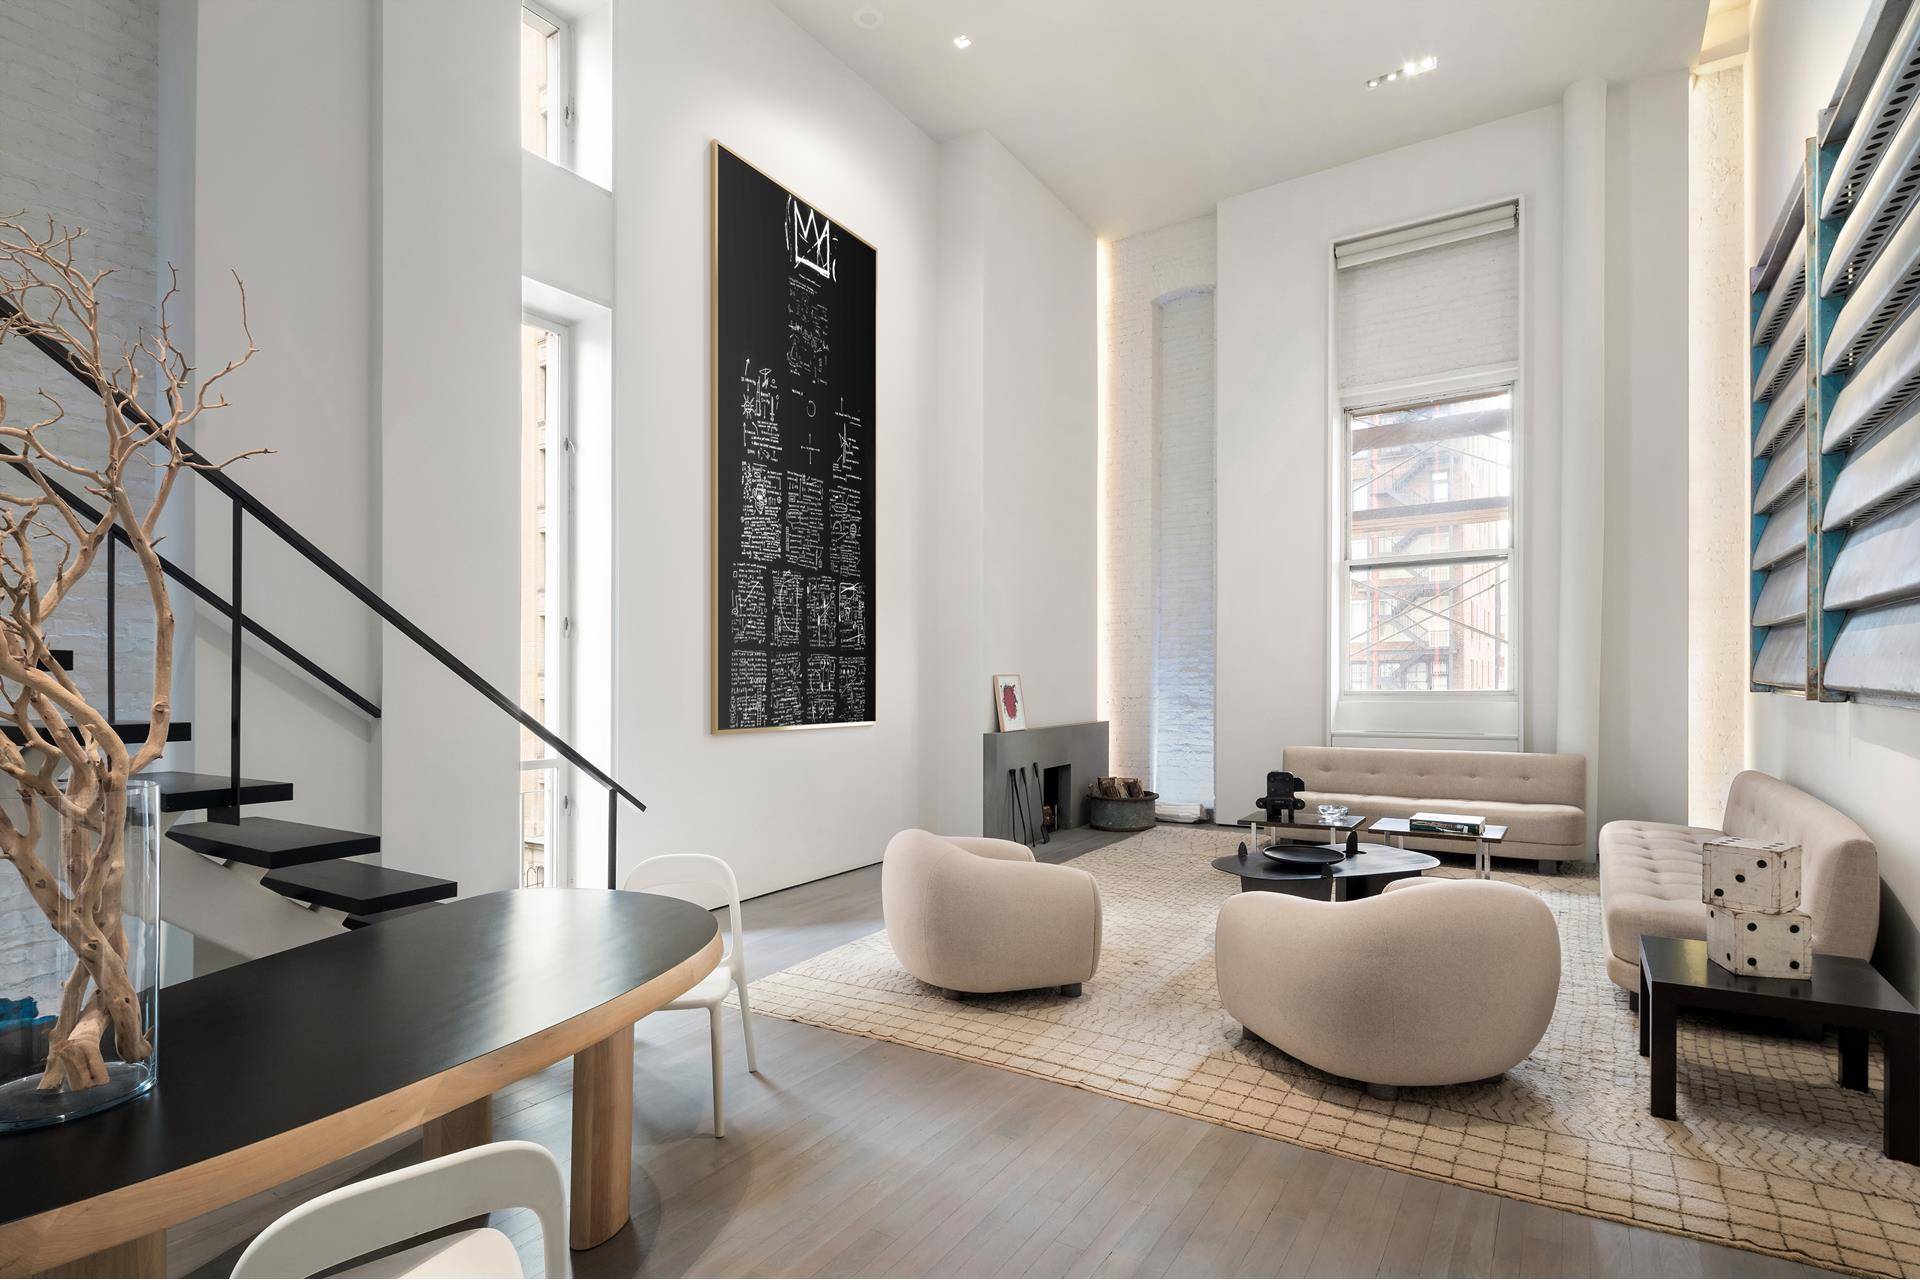 With three exposures, oversized windows, and soaring 24 foot ceilings, this designer one of a kind pre war loft is awash in natural light and is pin drop quiet thanks ...